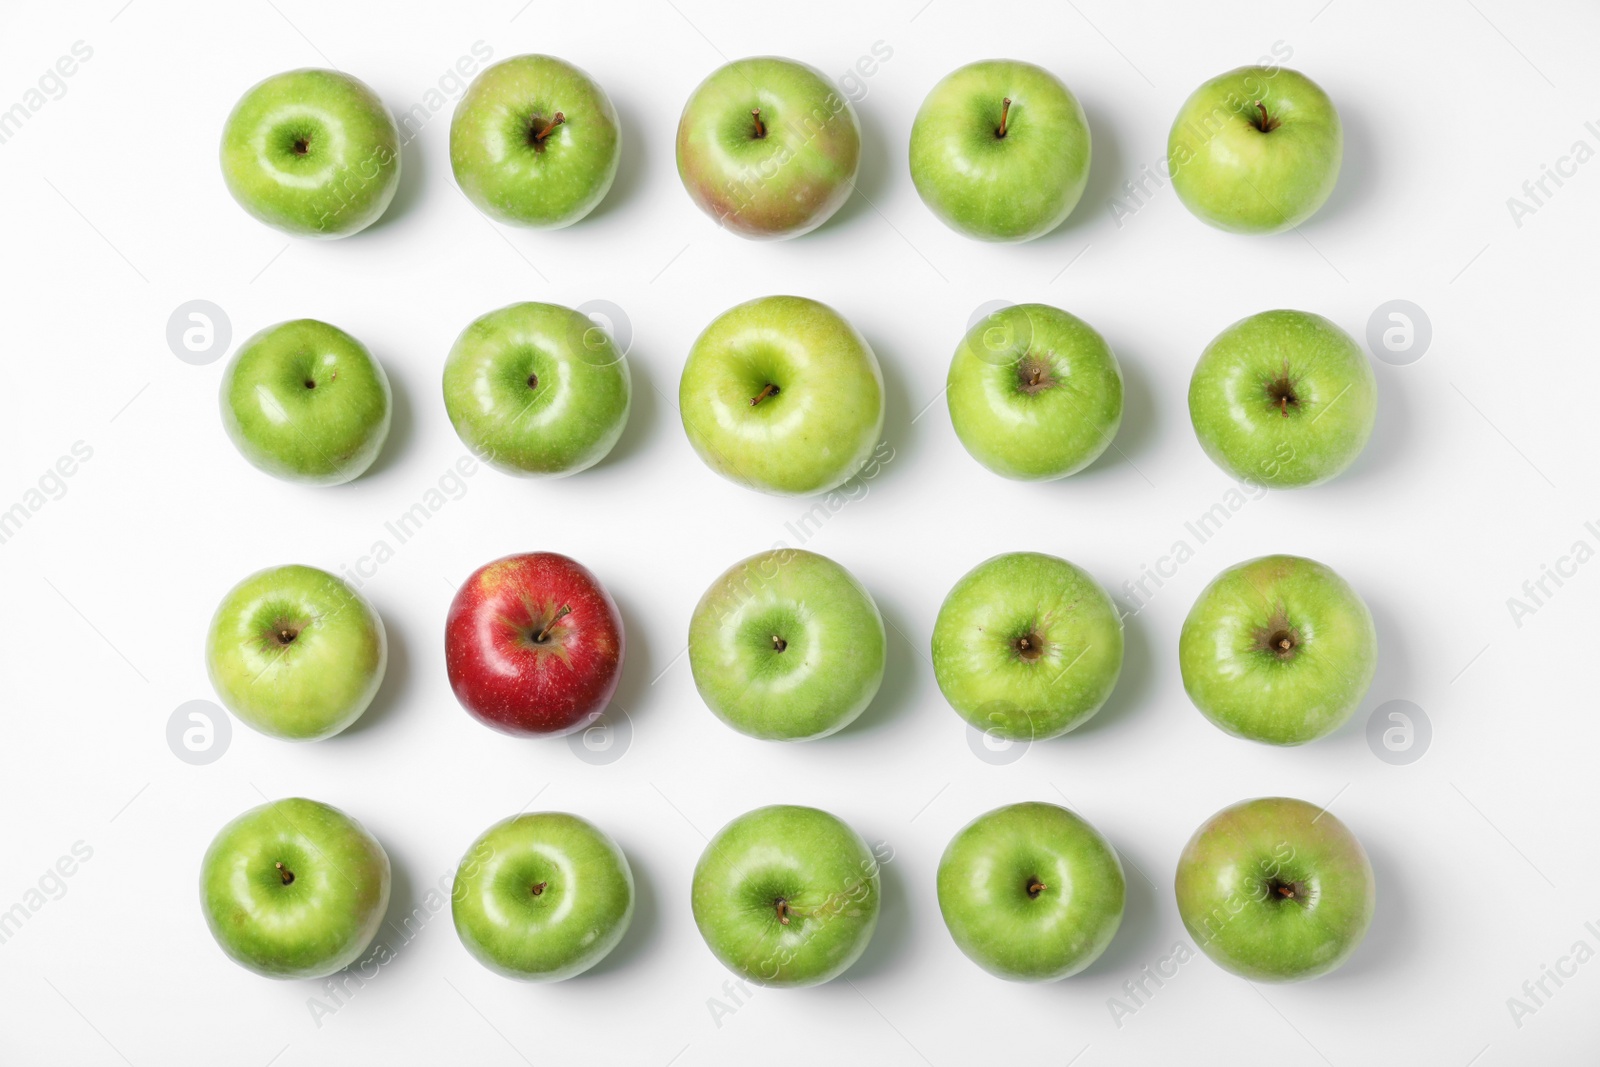 Photo of Red apple among green ones on white background, top view. Be different